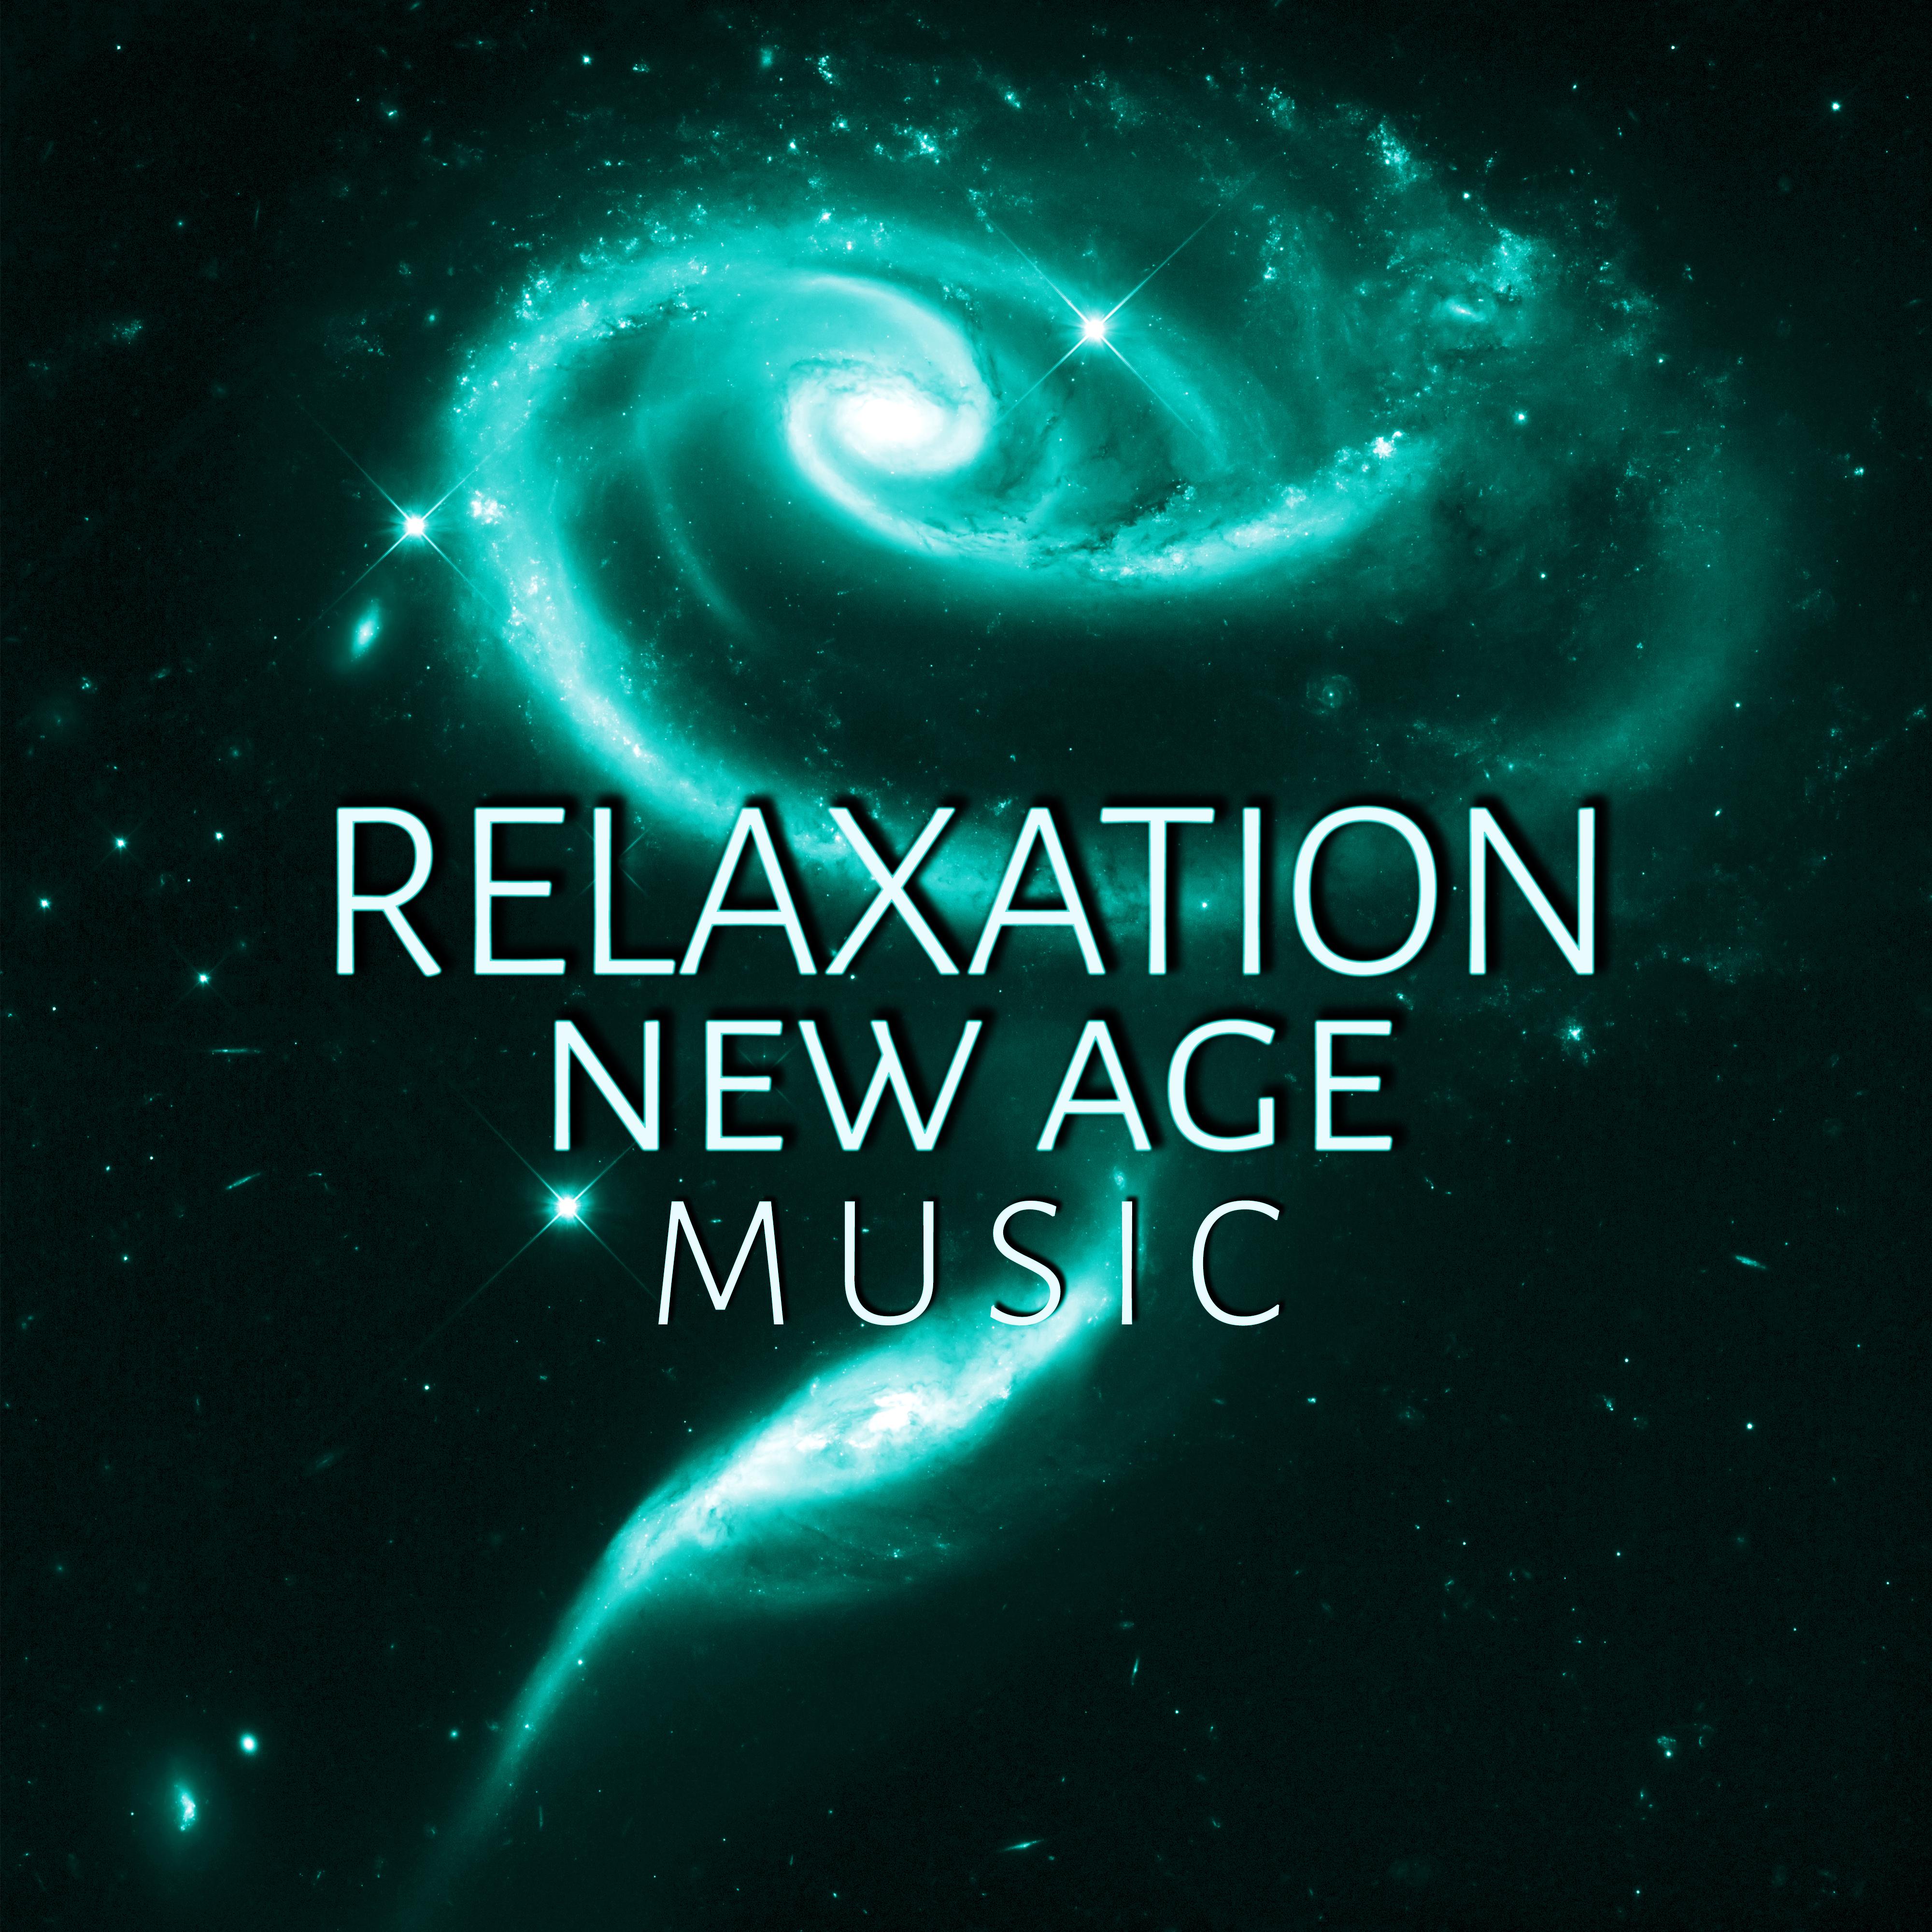 Relaxation New Age Music  New Age Music for Mindfulness Meditation, Ultimate New Age